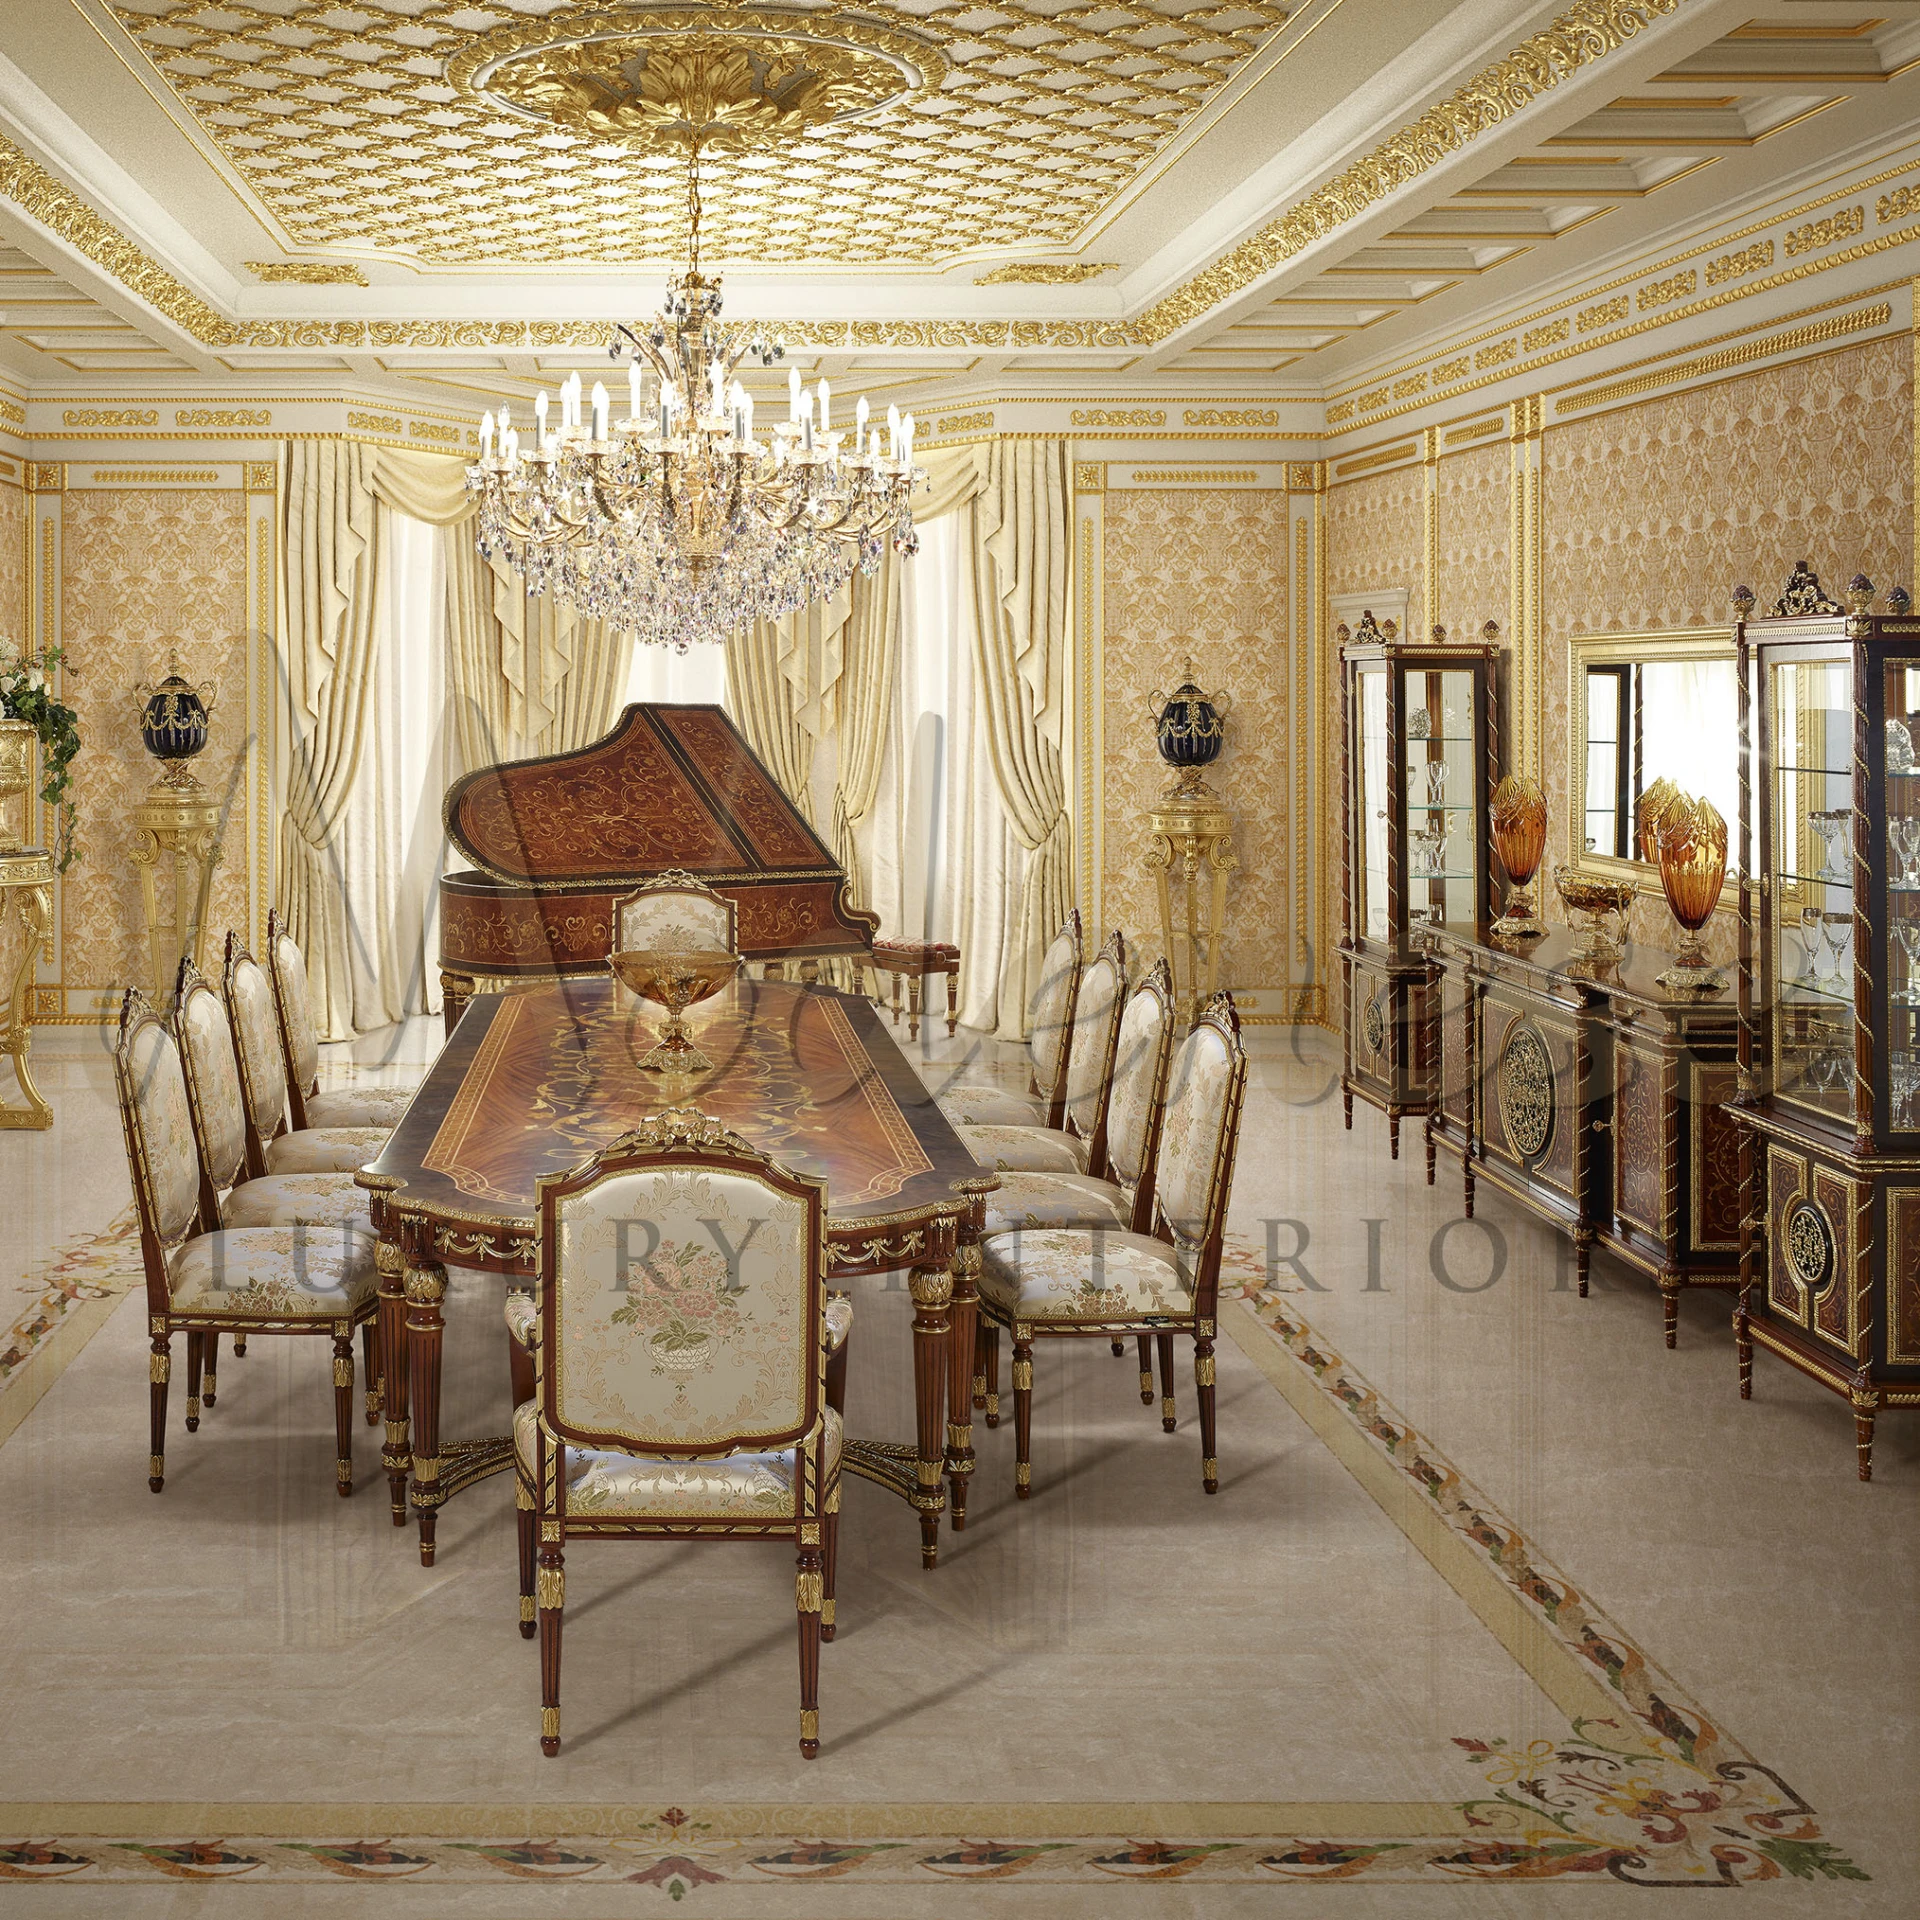 Upgrade your space with Modenese Luxury Interior. This vitrine boasts empire-style revival, precious inlays, gold leaf decorations, and handcrafted wooden interior. 